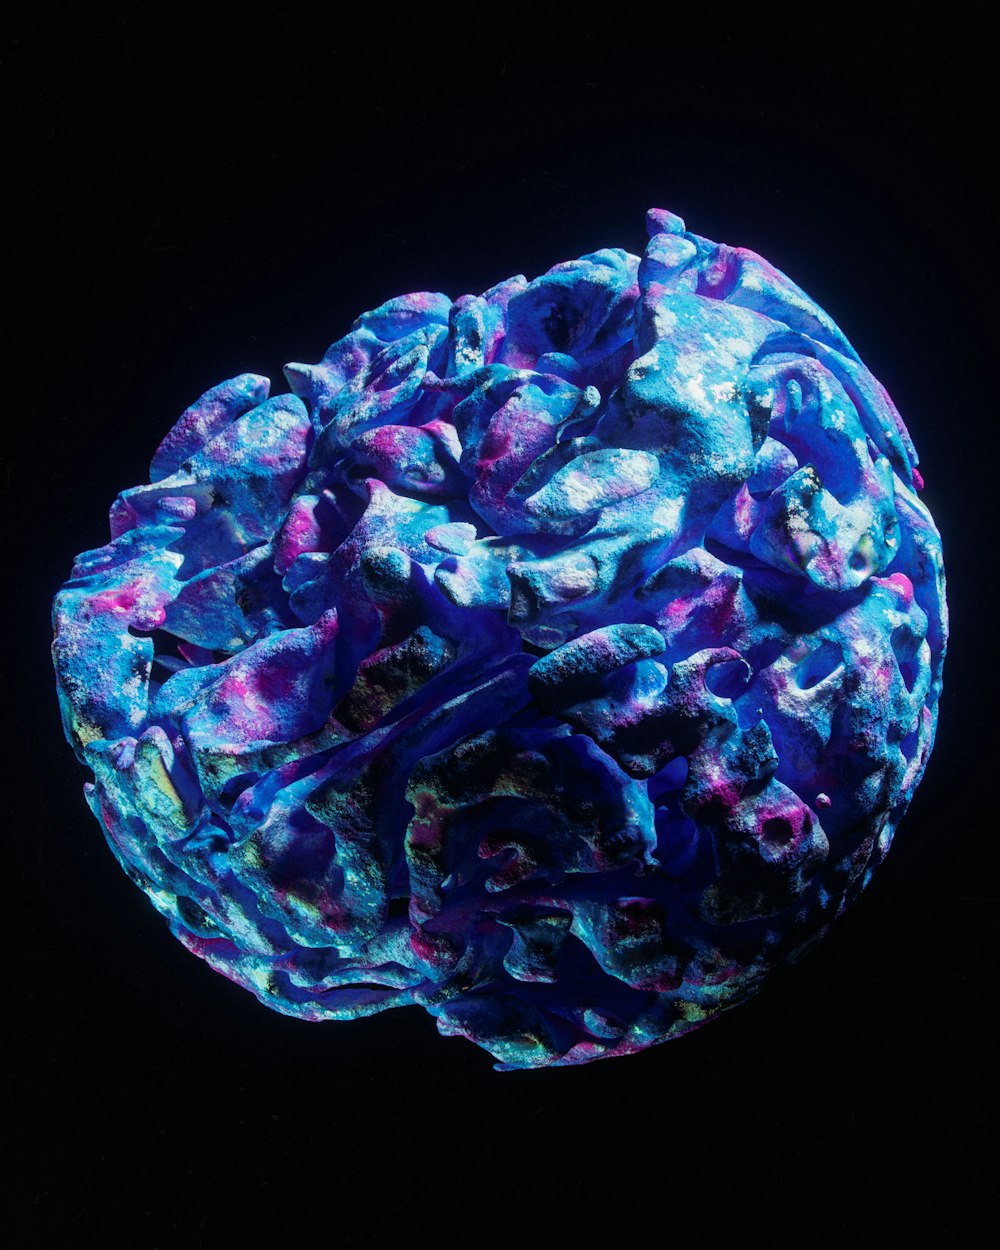 a ball of blue and purple paint on a black background